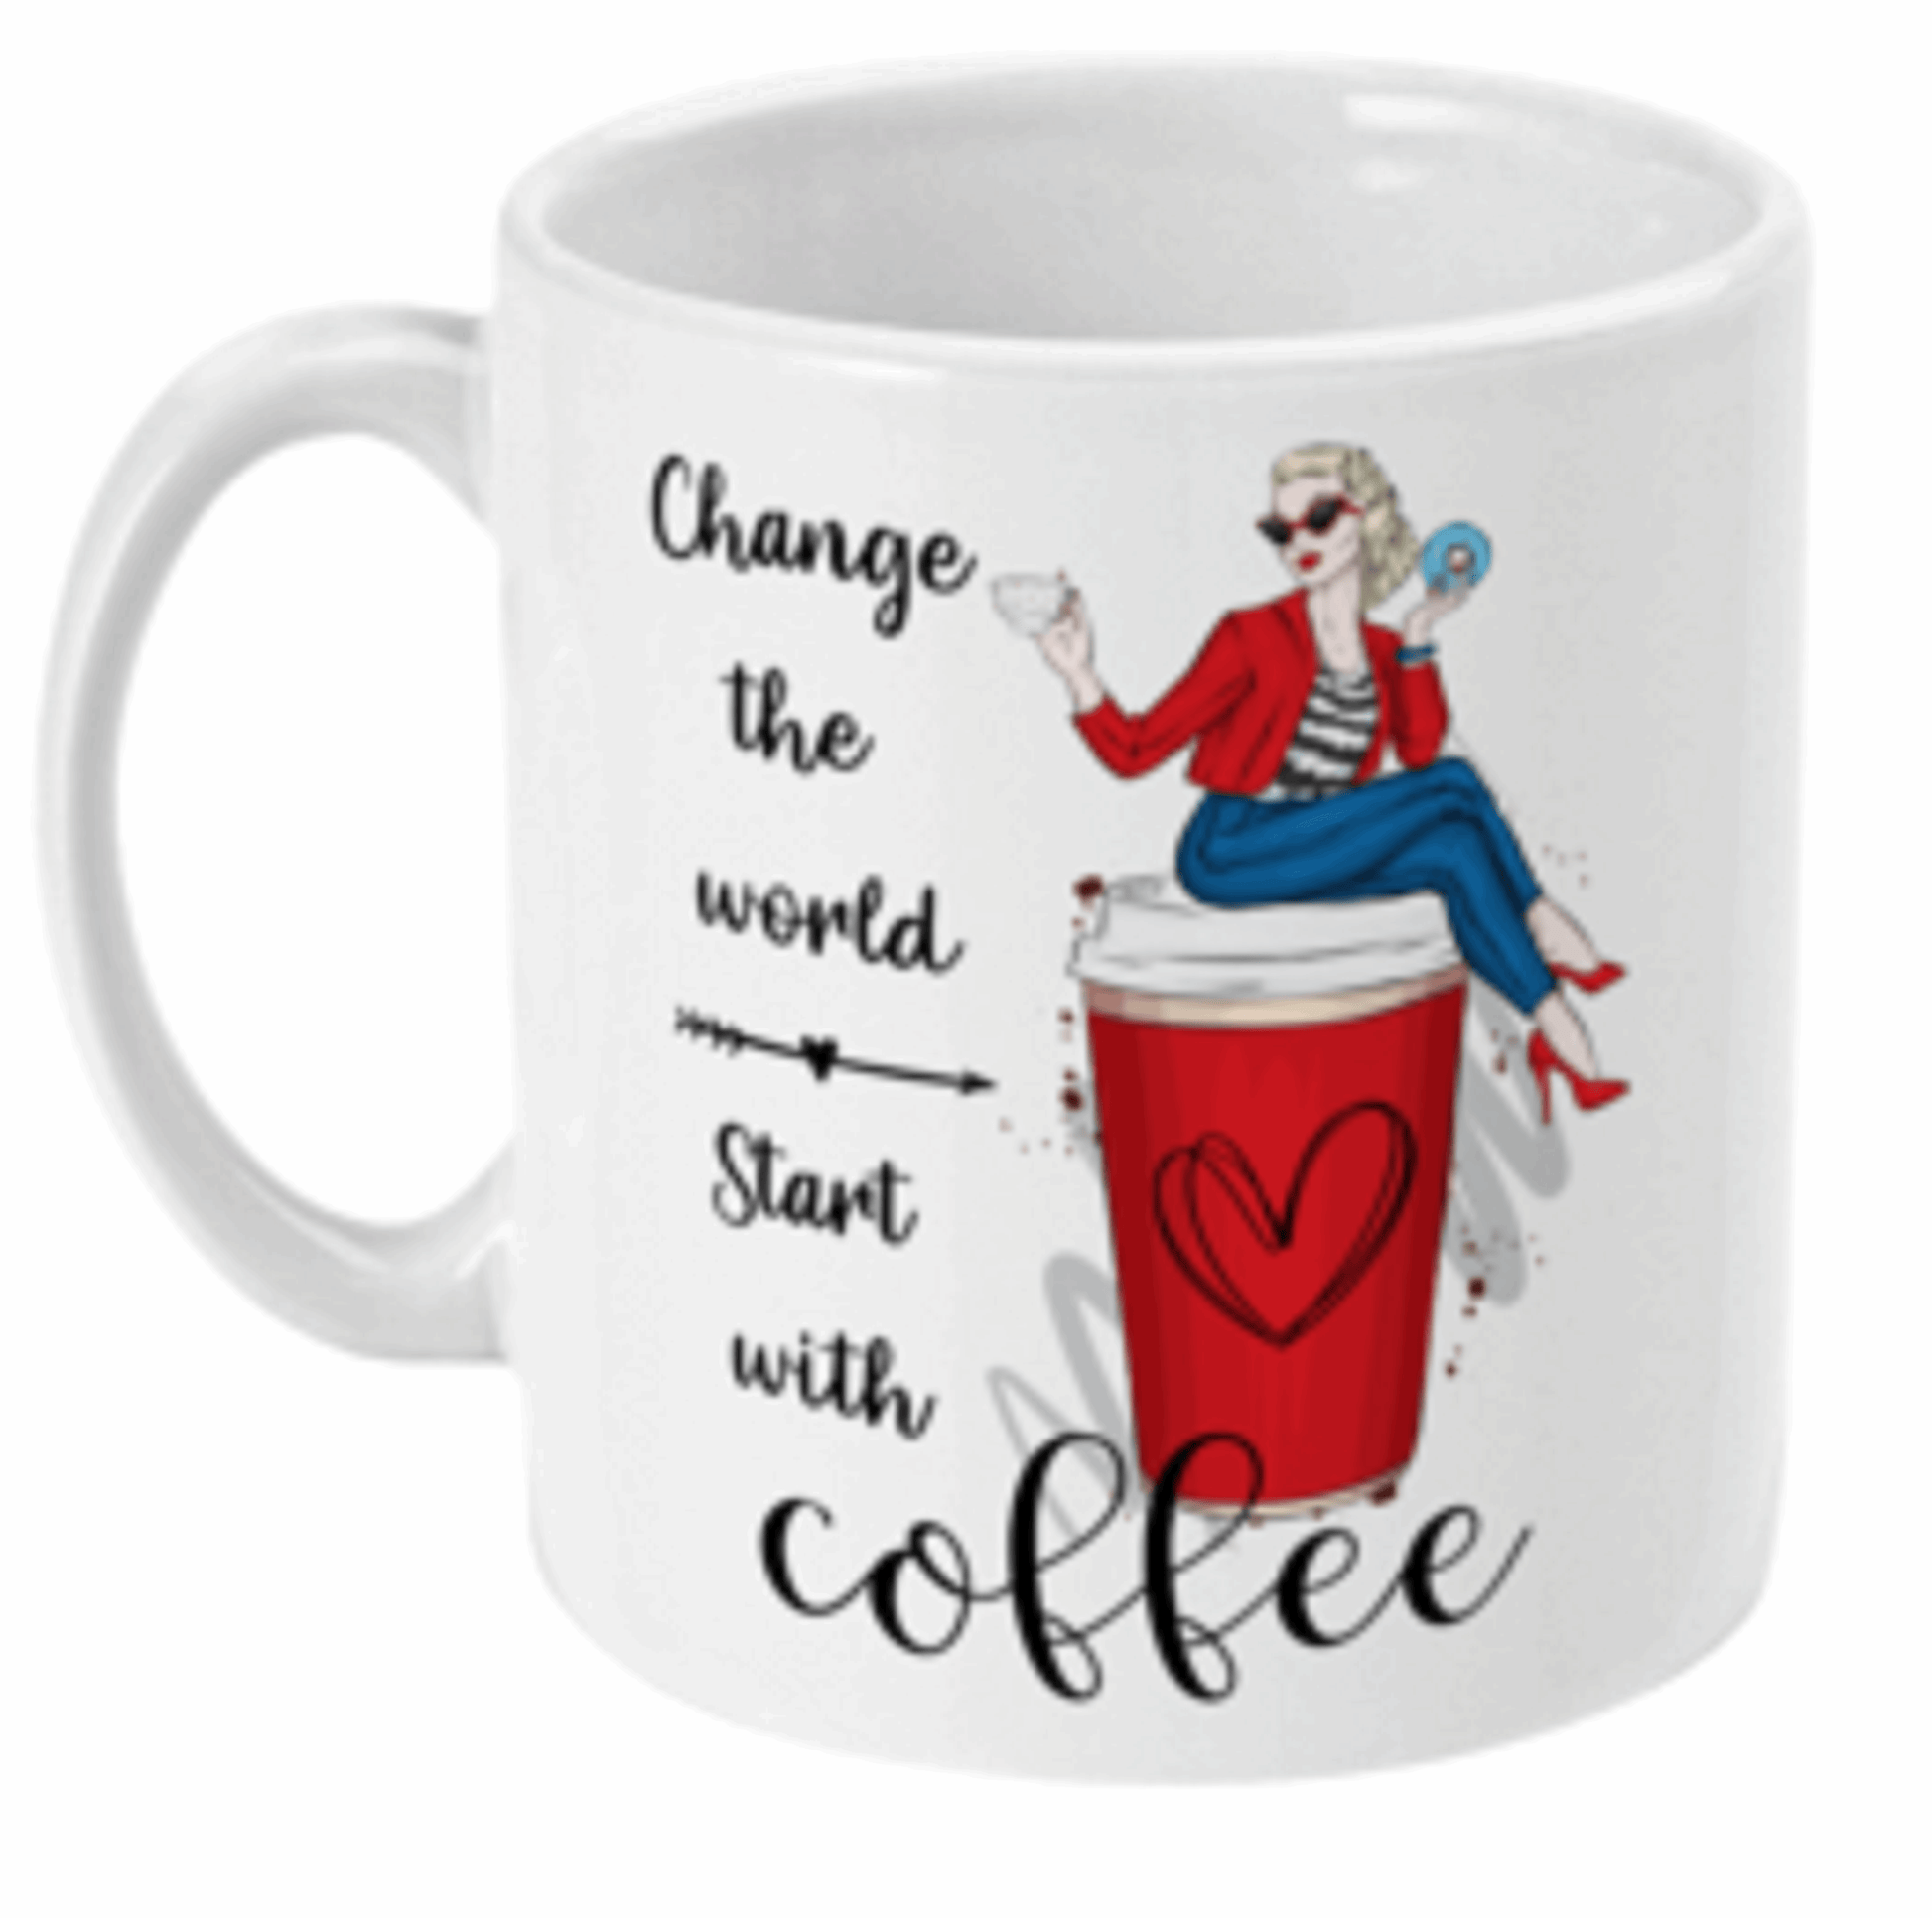  Change the World Lets Start With Coffee Mug by Free Spirit Accessories sold by Free Spirit Accessories